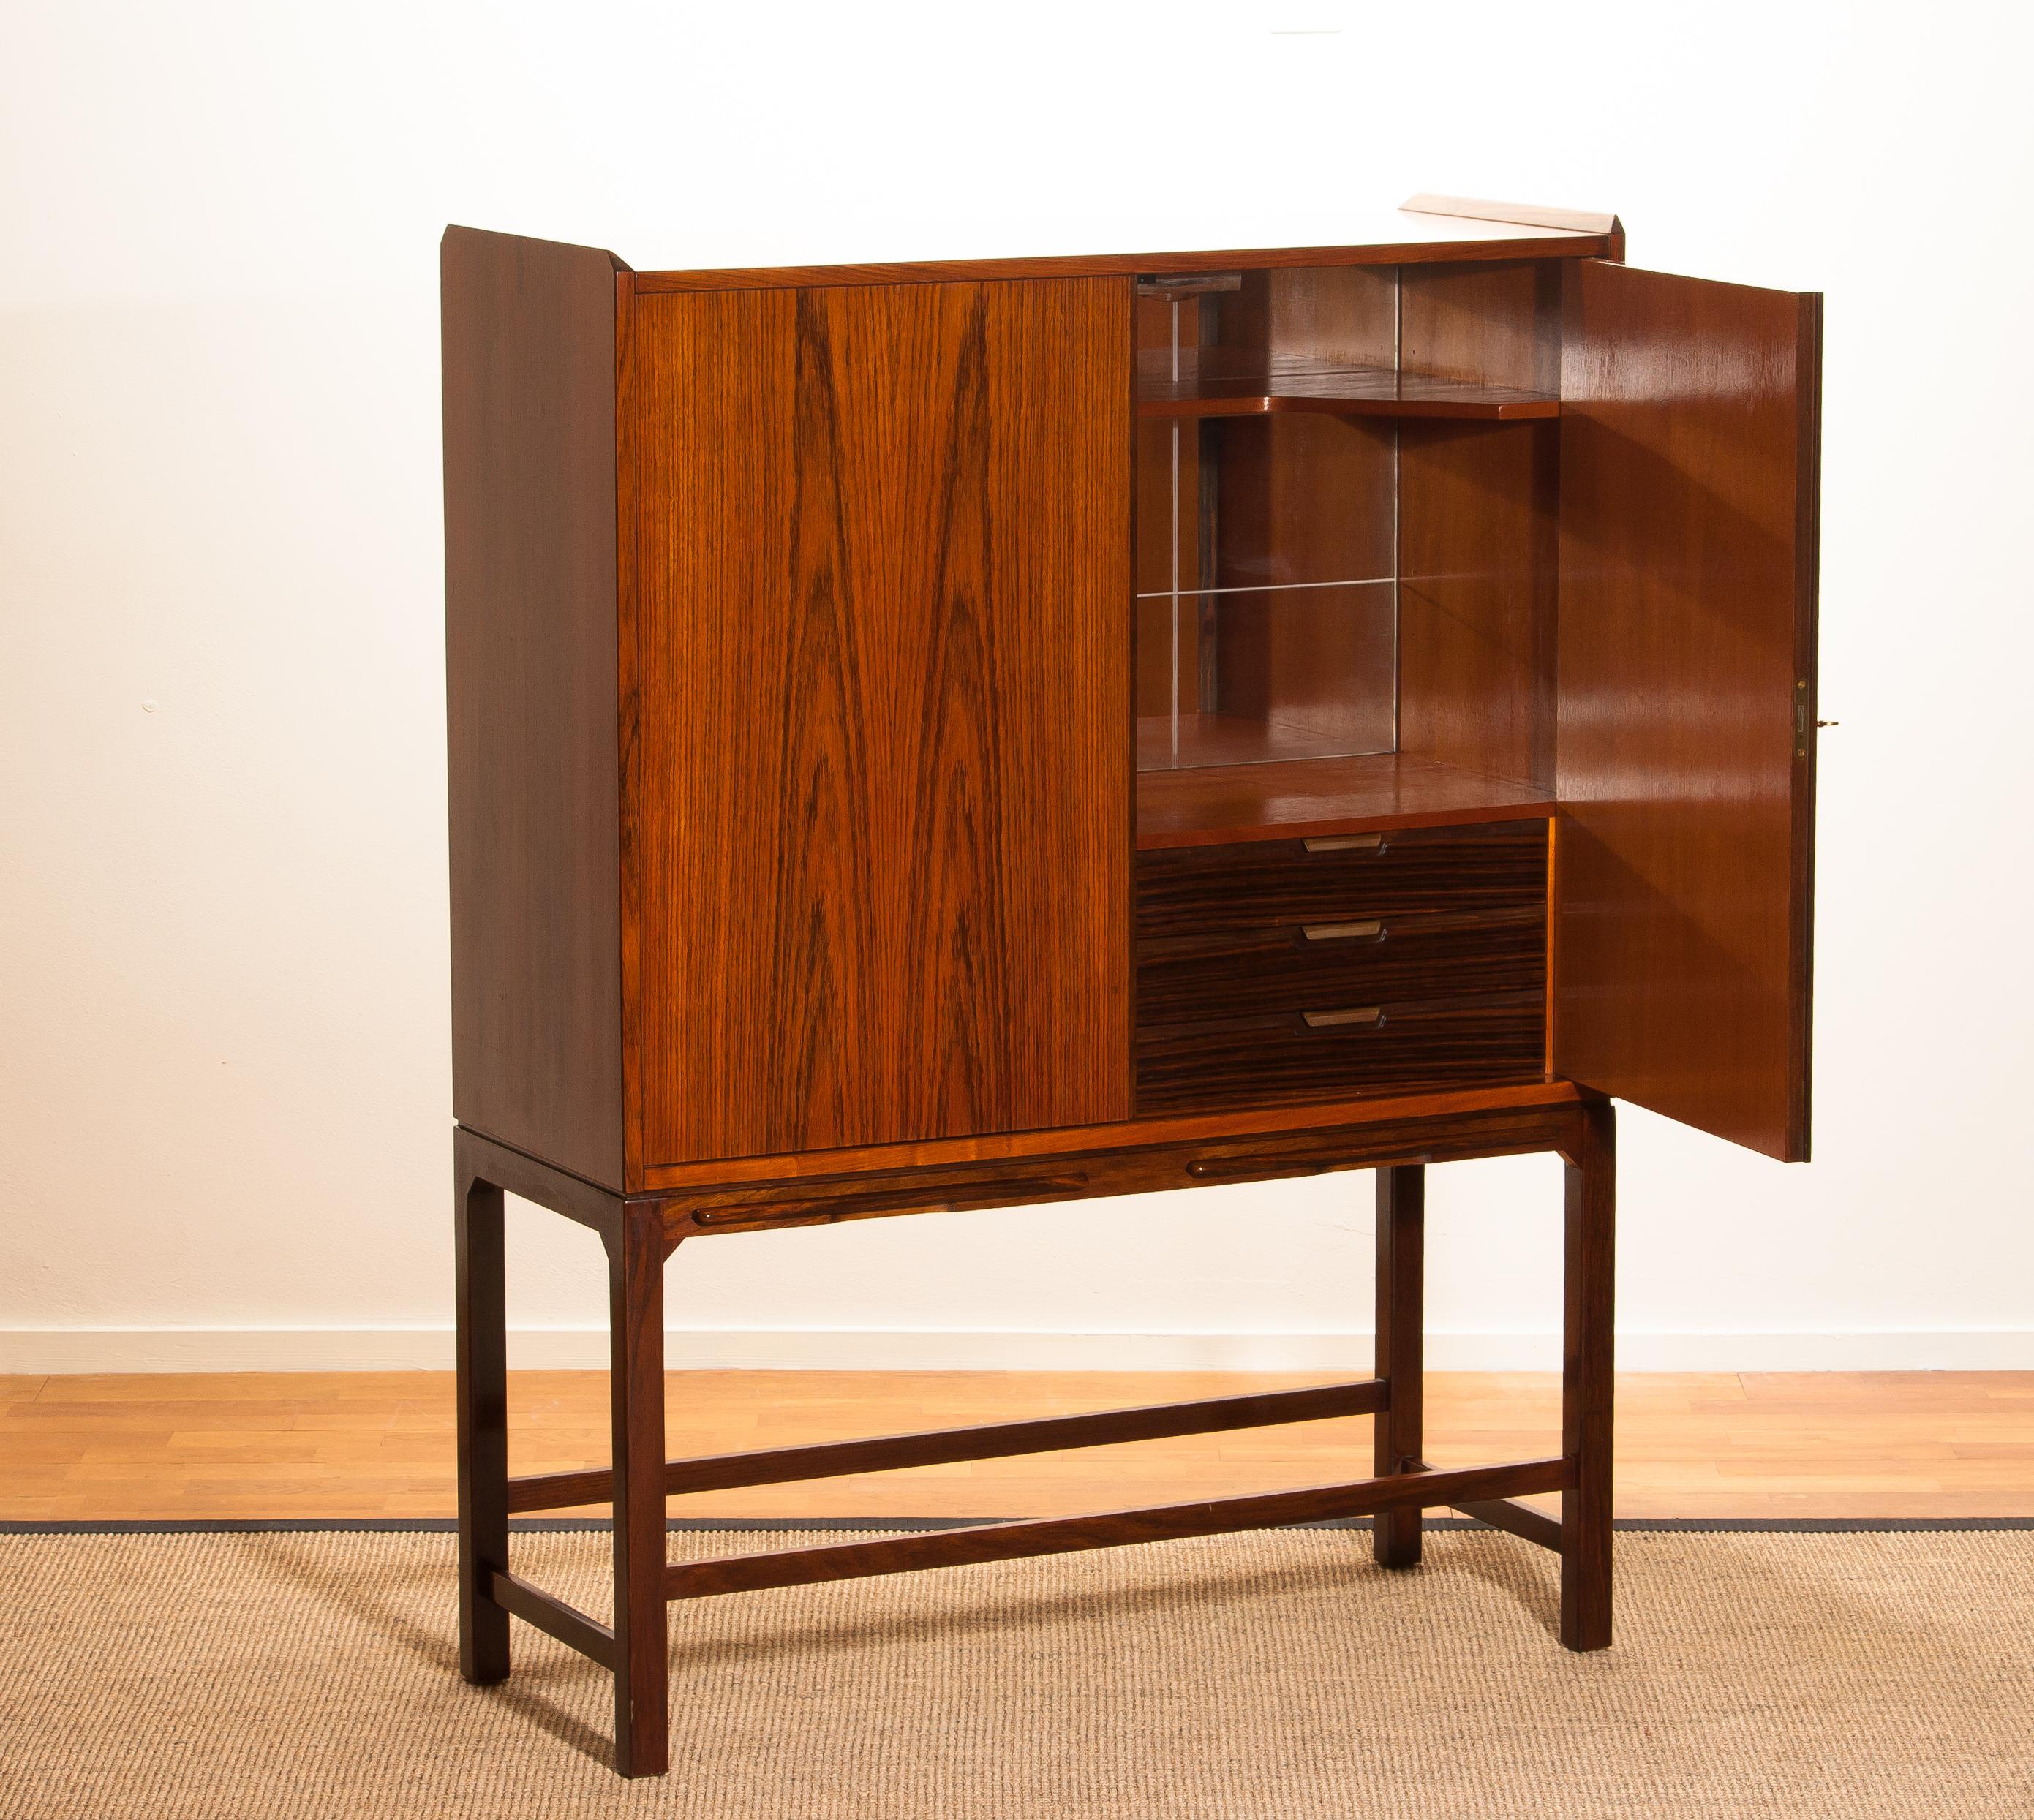 Exceptional beautiful and in perfect condition dry bar or cocktail cabinet of mahogany on a skinny walnut stand. In the walnut, stand are two extendable shelves.
Inside the cabinet is made of teak. The three drawers are in walnut. The drawers are